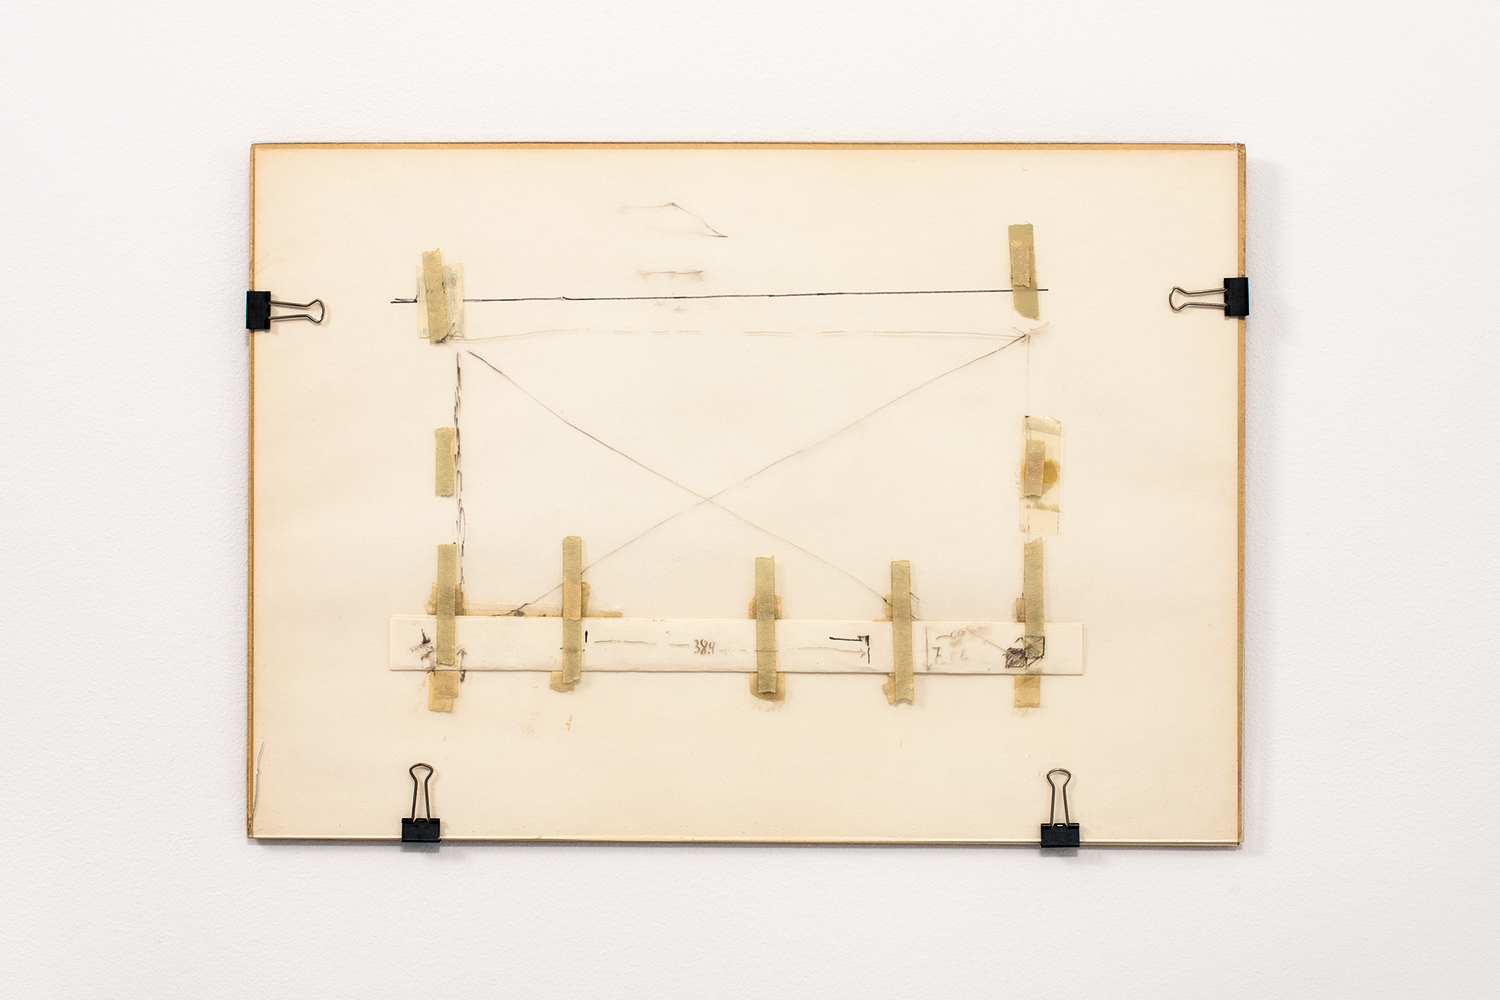  Nahum Tevet, Untitled #1, 1972. Cardboard, paper, binder clips, masking tape, transparent tape, and marker on glass, 13 3/4 x 19 13/16 x 7/16 in. (34.9 x 50.3 x 1.1 cm). Collection of the artist. Photo by Polite Photographic, courtesy of the Hunter 